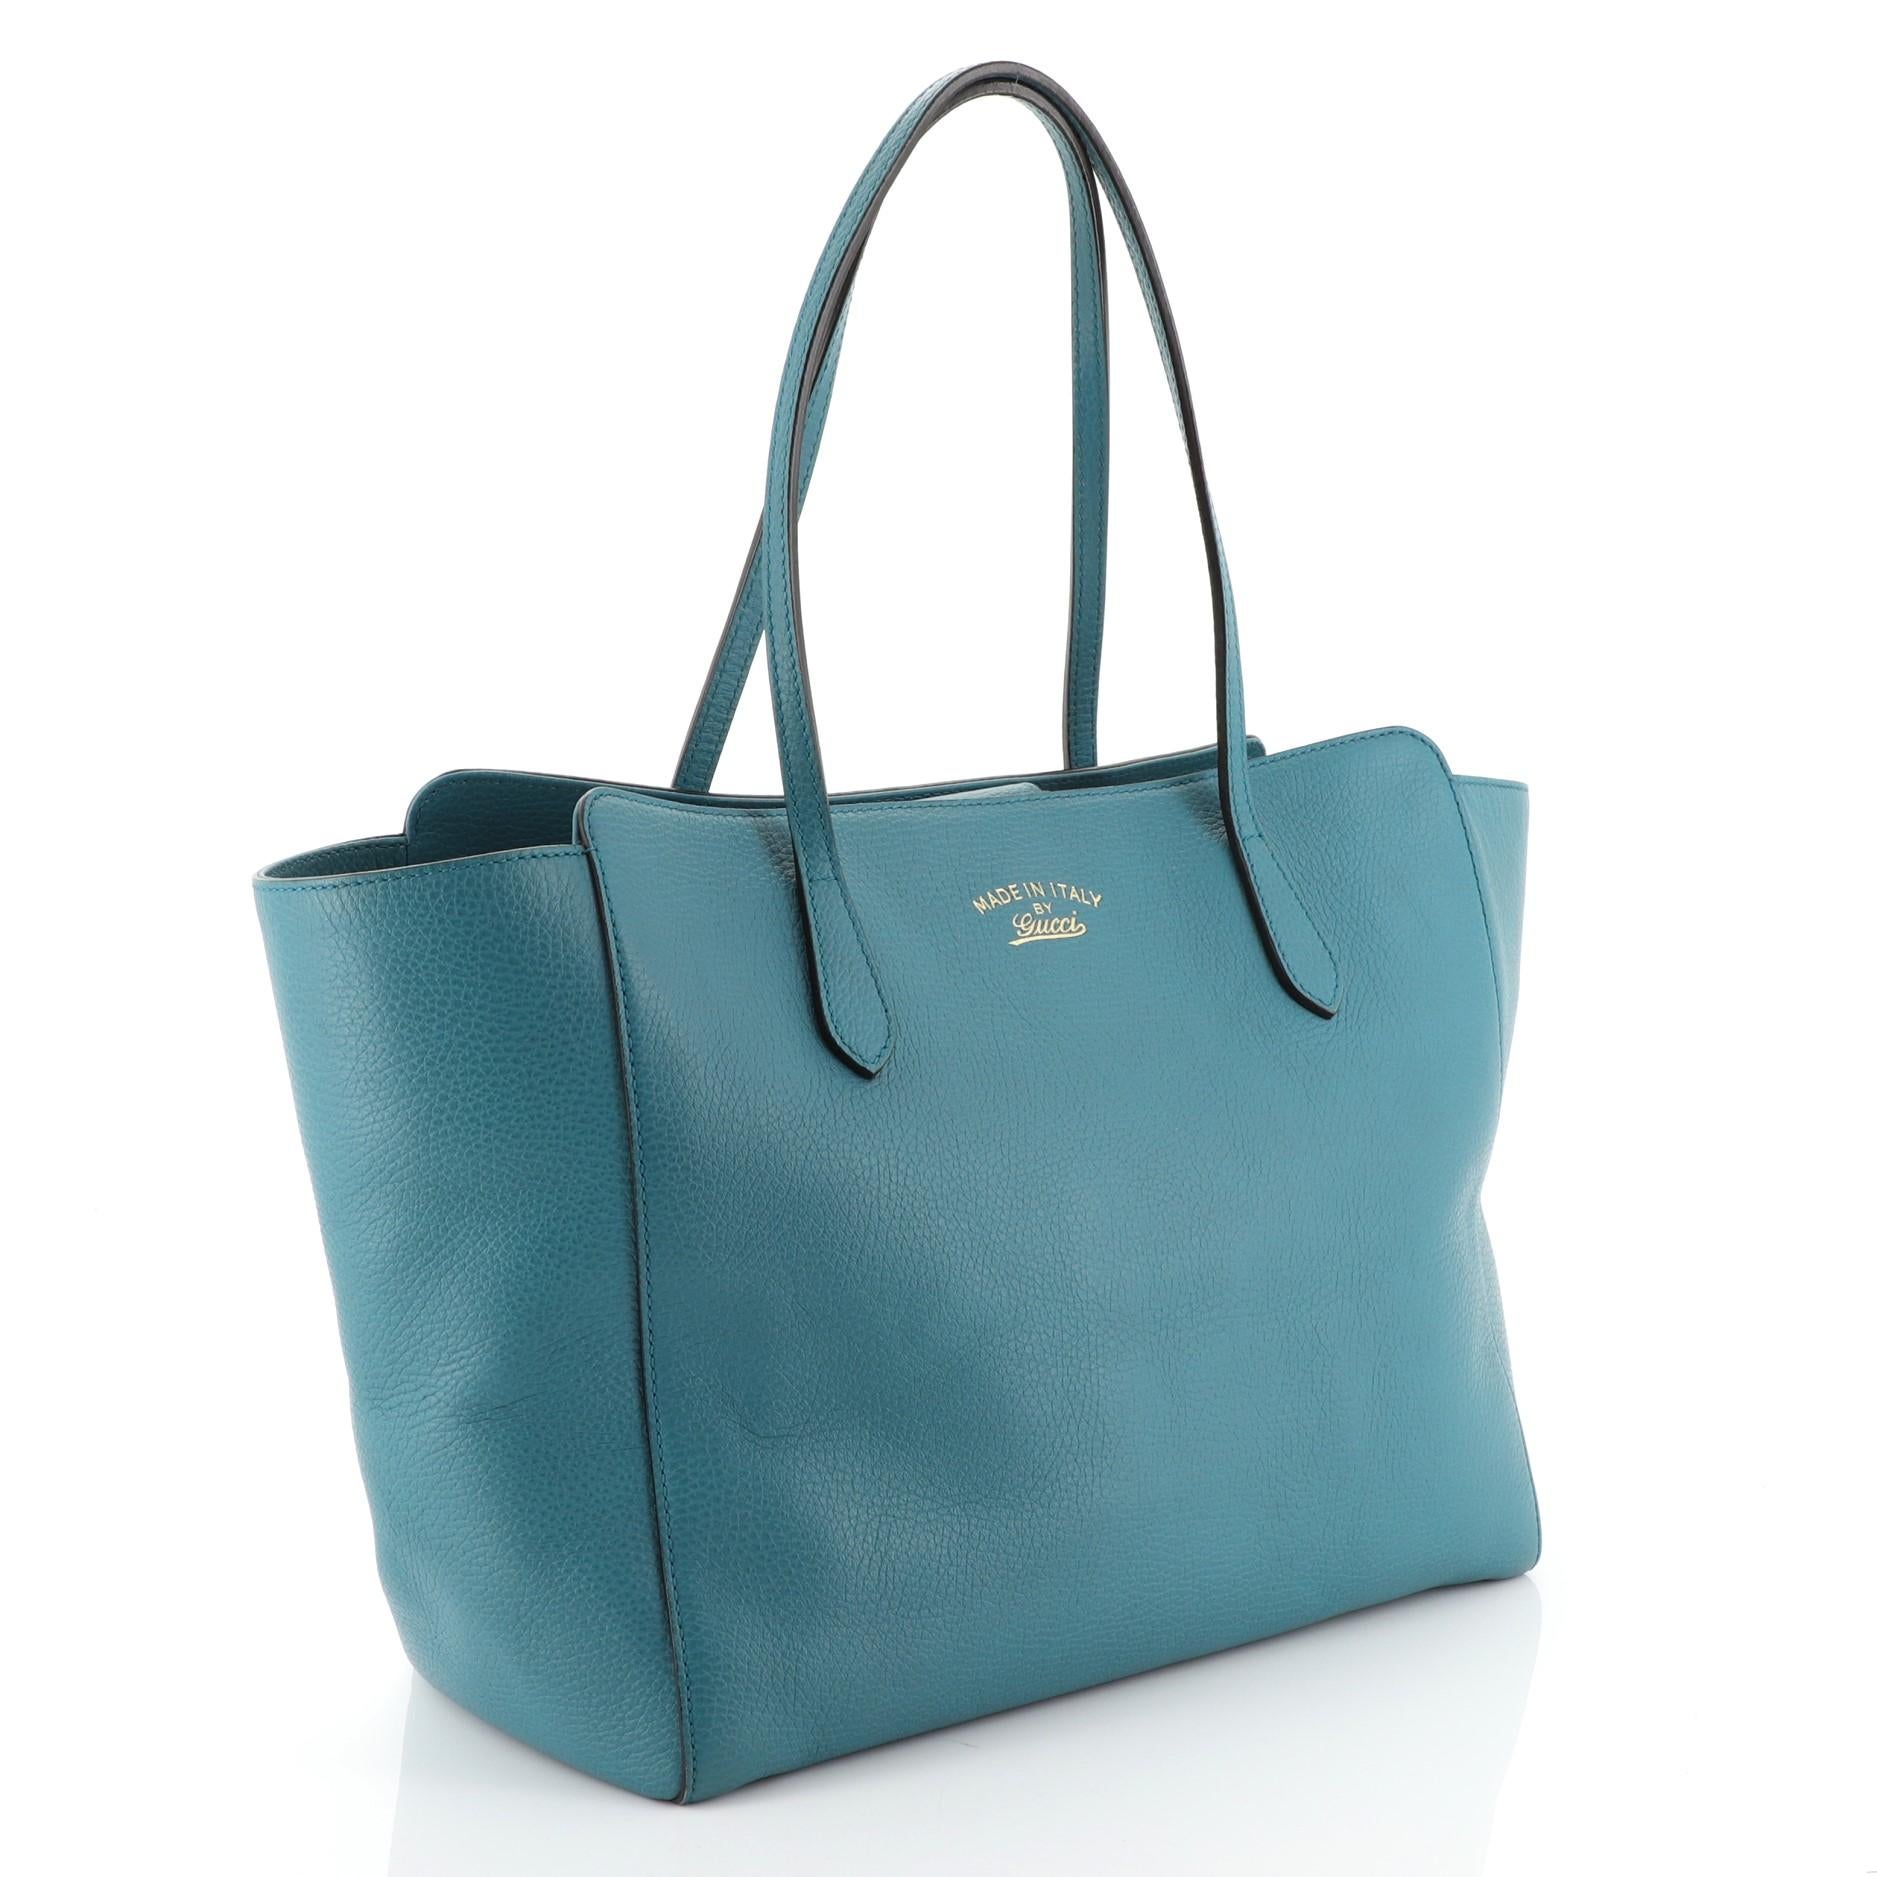 This Gucci Swing Tote Leather Medium, crafted in blue leather, features dual slim handles, Gucci stamped logo at the front, expanded wing silhouette, and gold-tone hardware. Its hidden magnetic snap closure opens to a neutral canvas interior with